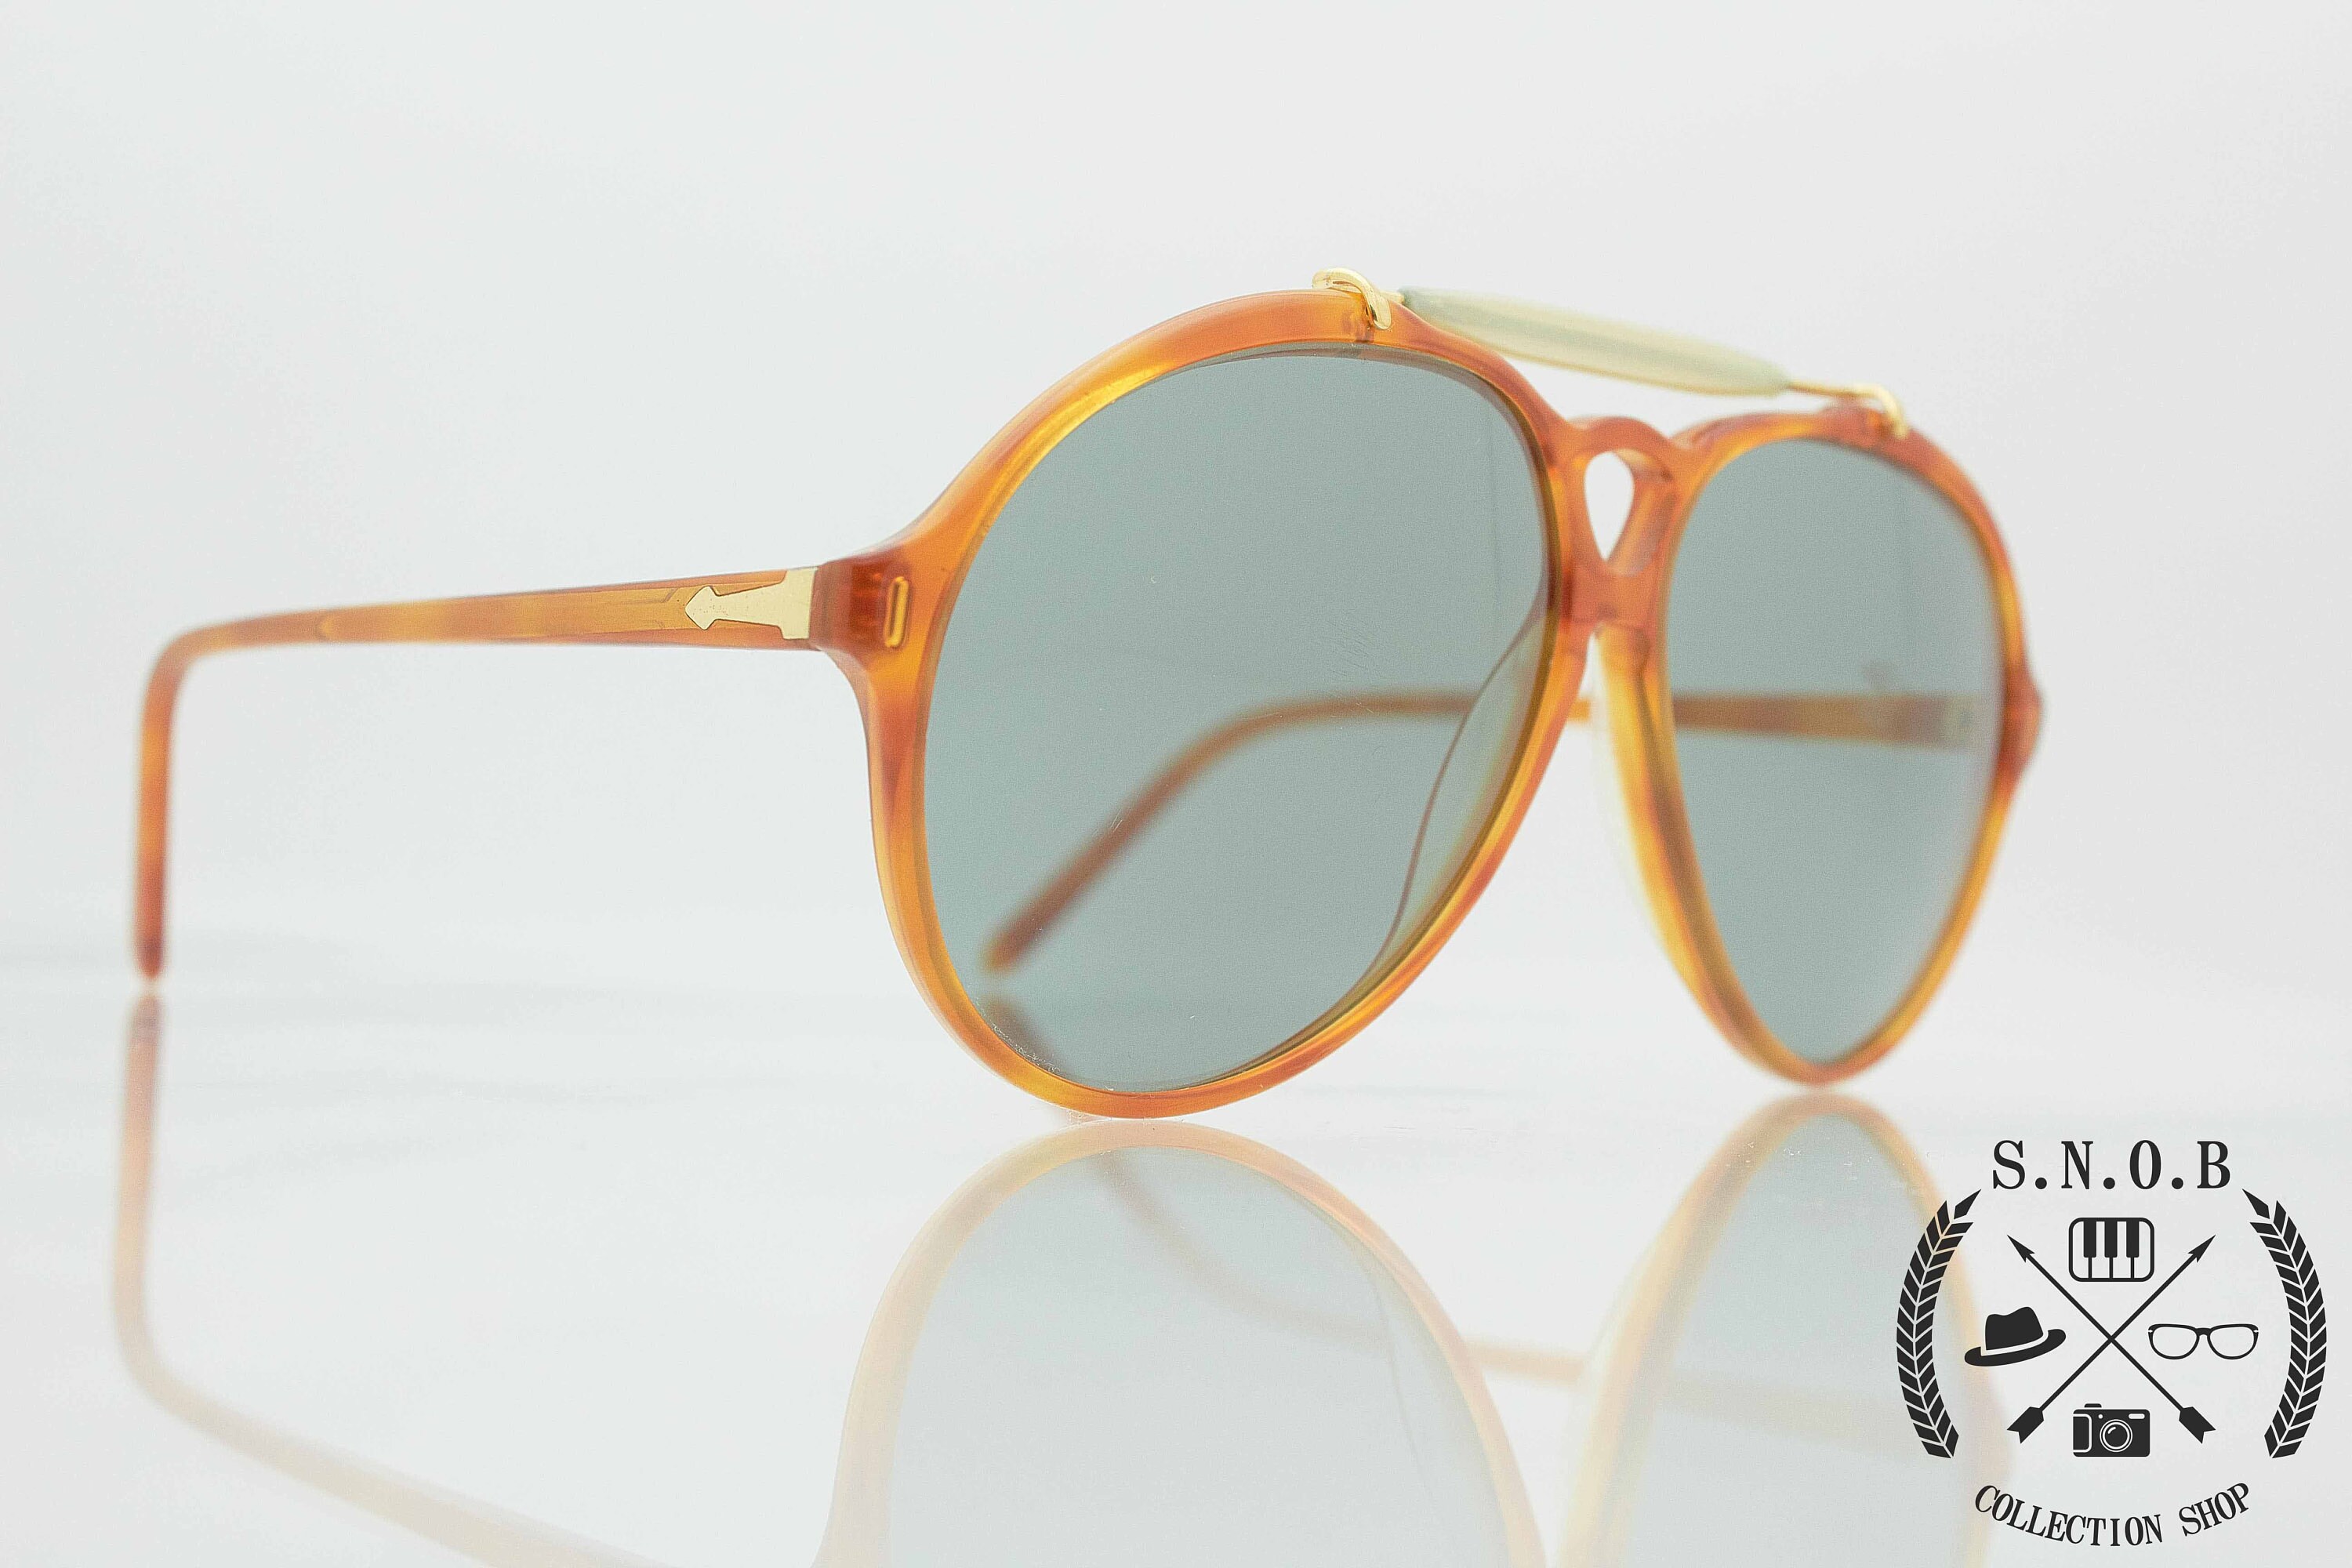 Vintage Sunglasses PERSOL RATTI 450 Rarity Collection Italy - Etsy